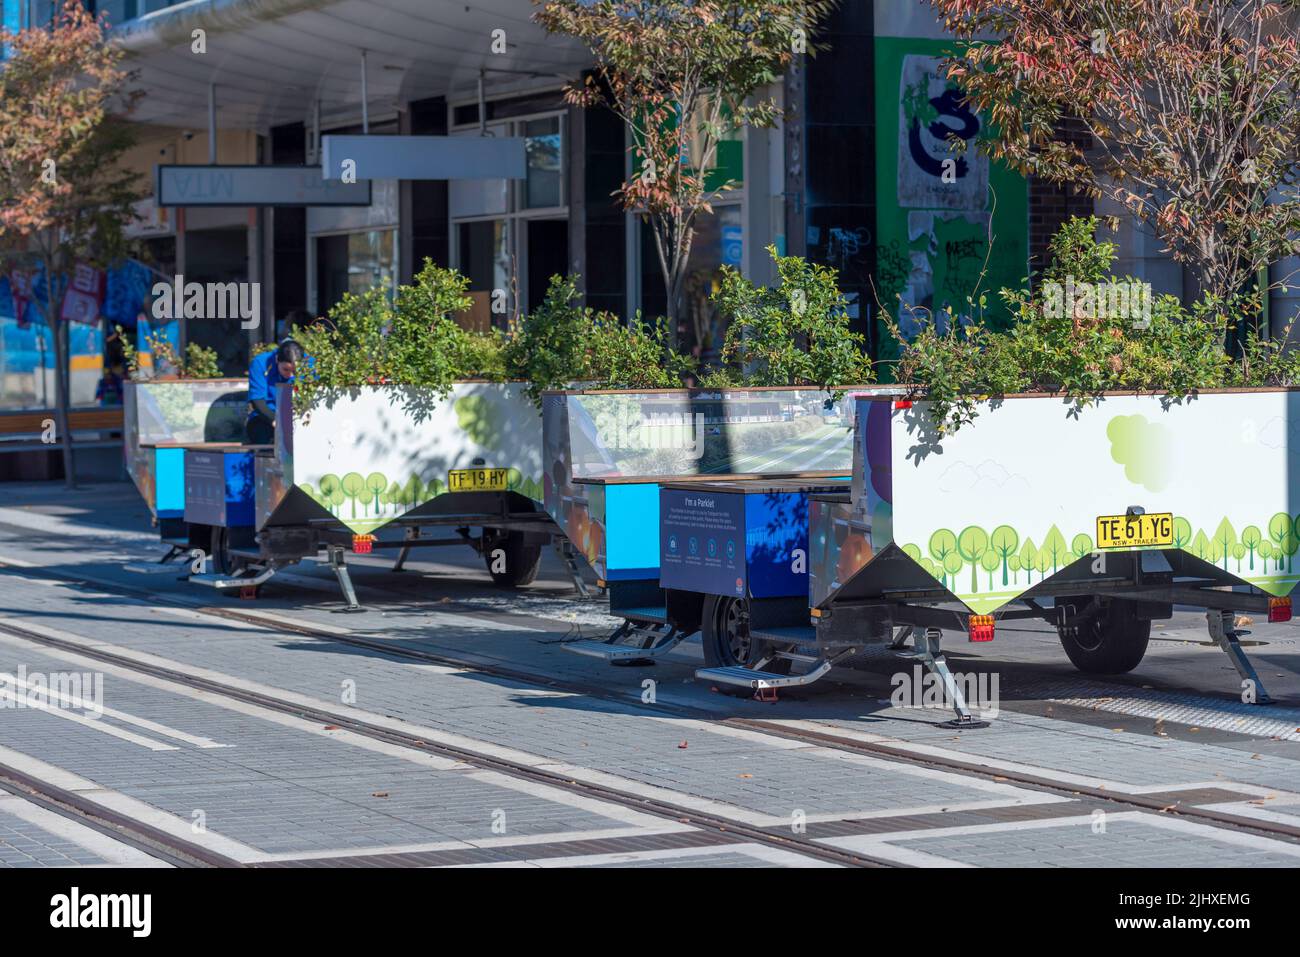 Parklets are trailer-mounted seating and gardens provided by Transport for New South Wales during the construction of the Parramatta Light Rail Stock Photo